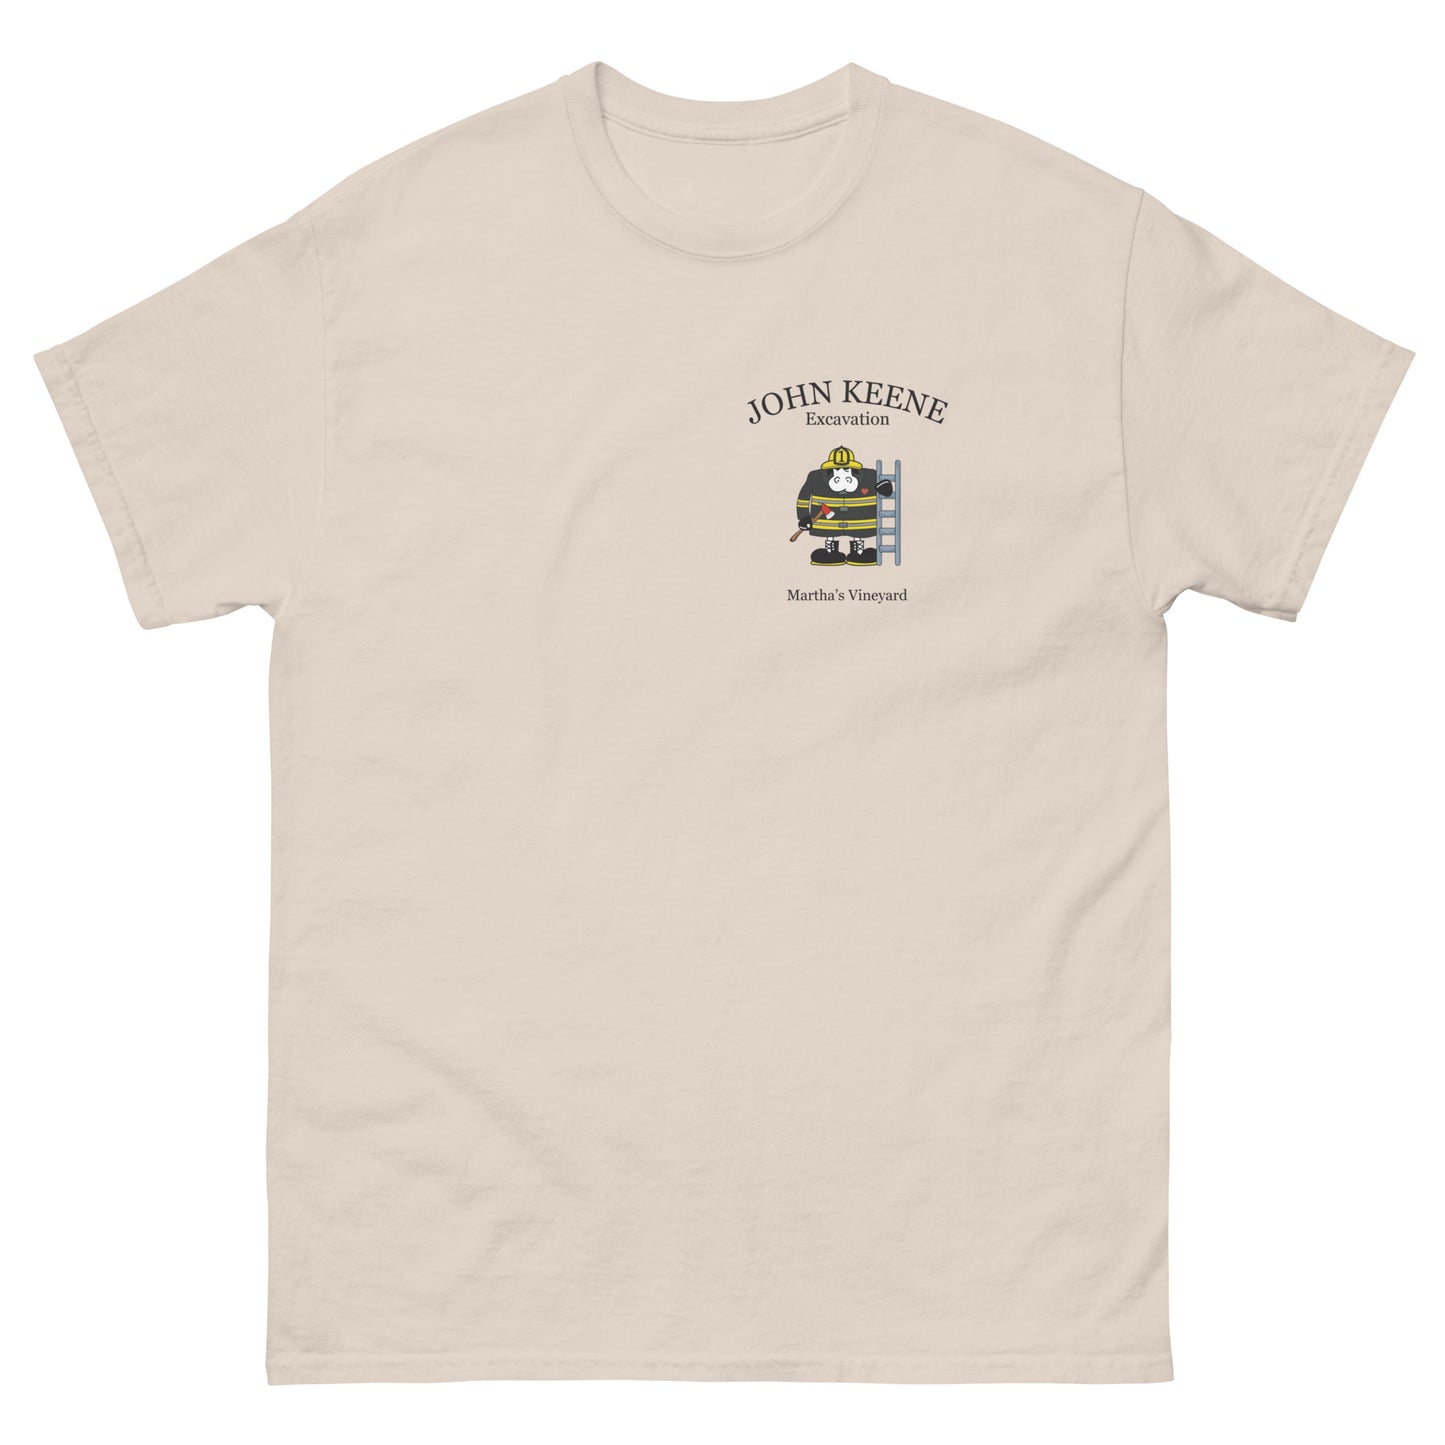 Firefighter Cow Tee